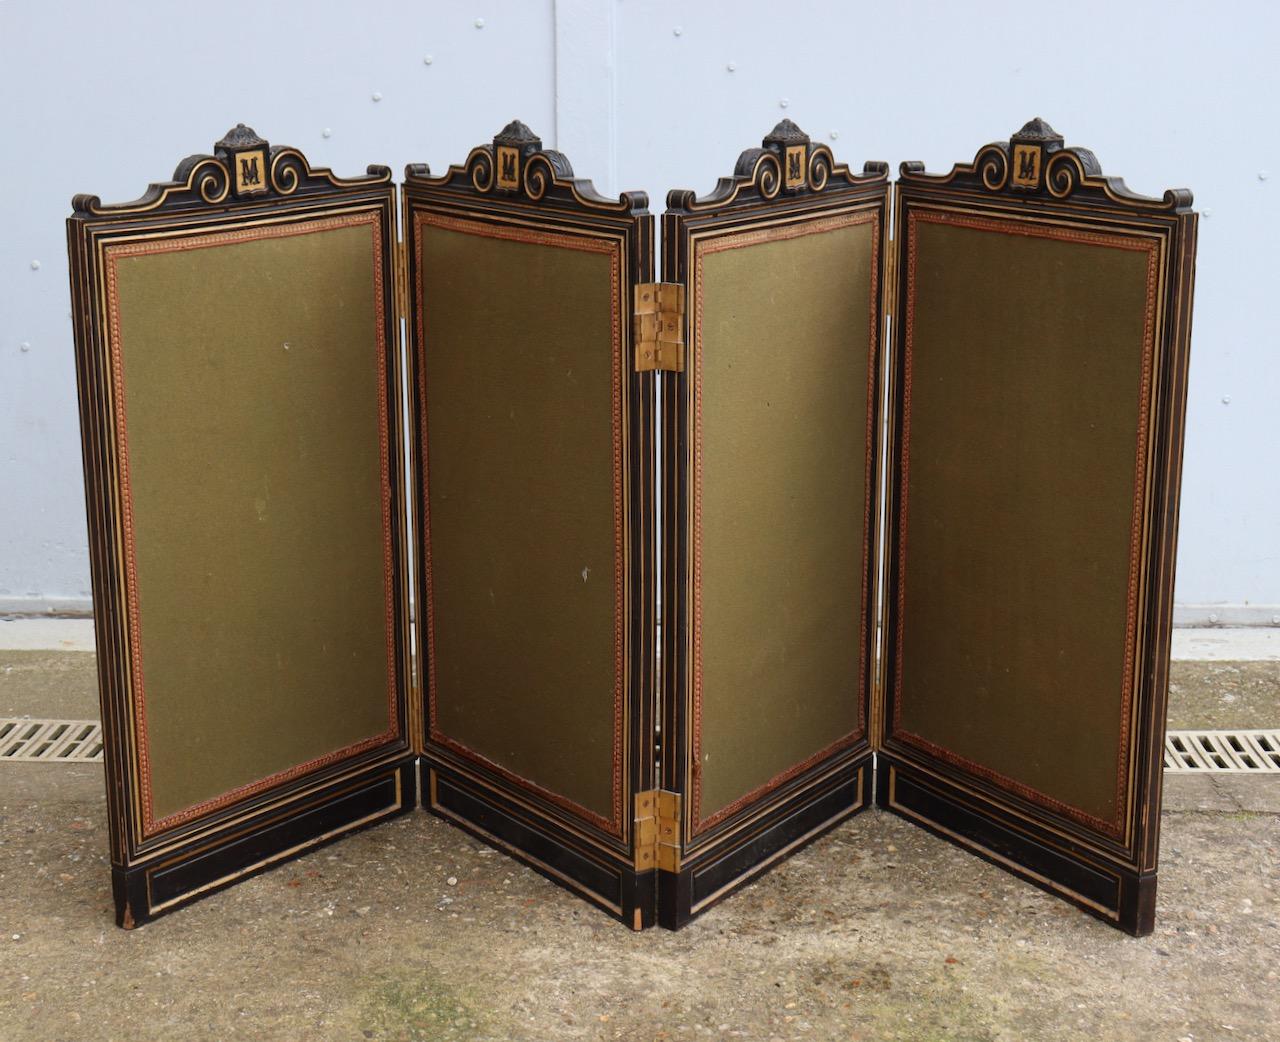 Black Lacquered and Gilt Wood Victorian Foldable Fire Screen, 19th Century For Sale 2